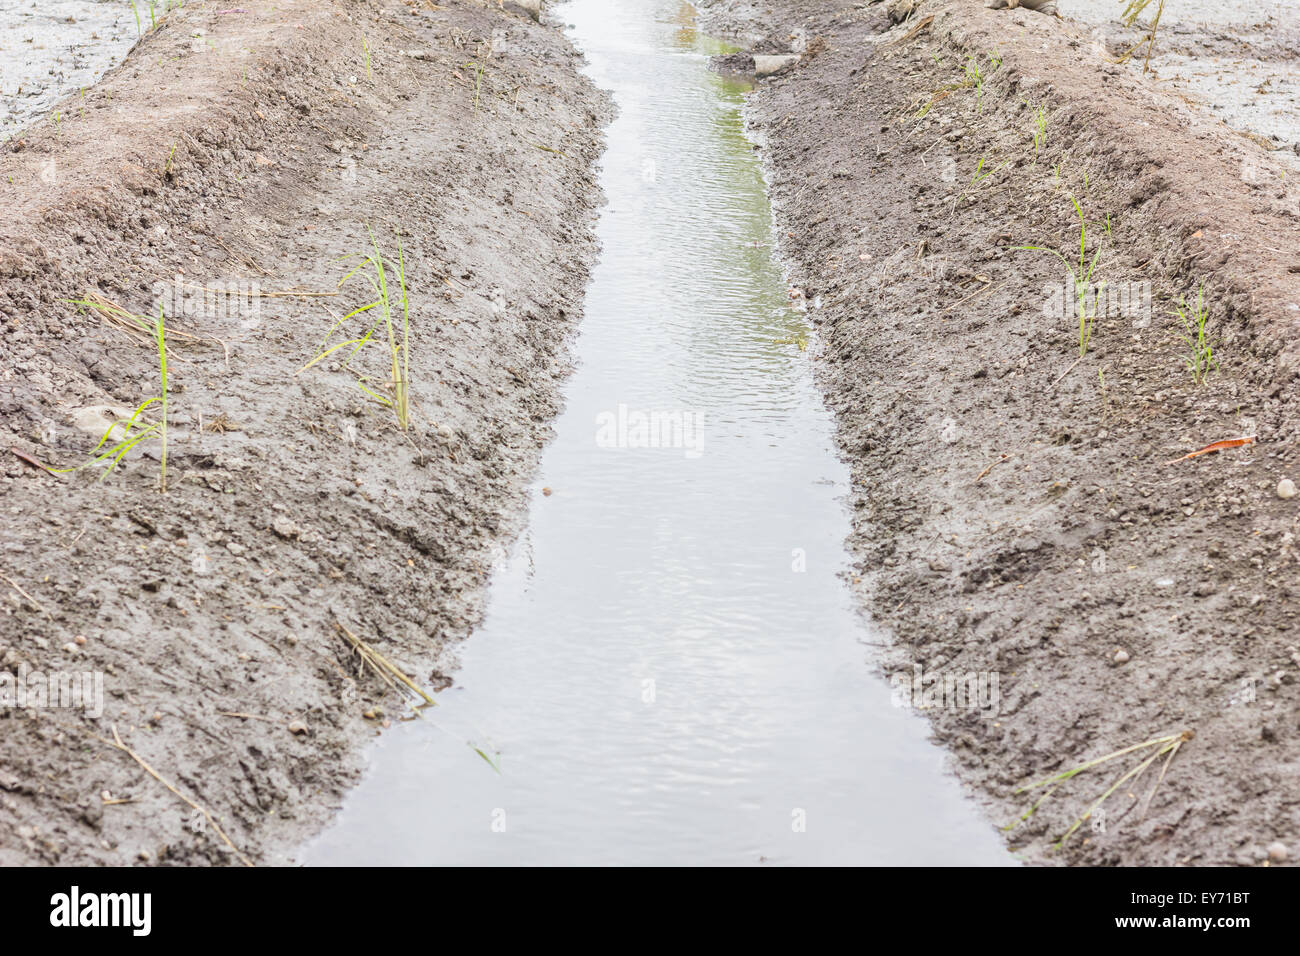 Rice are growing and watercourse reasserted Stock Photo